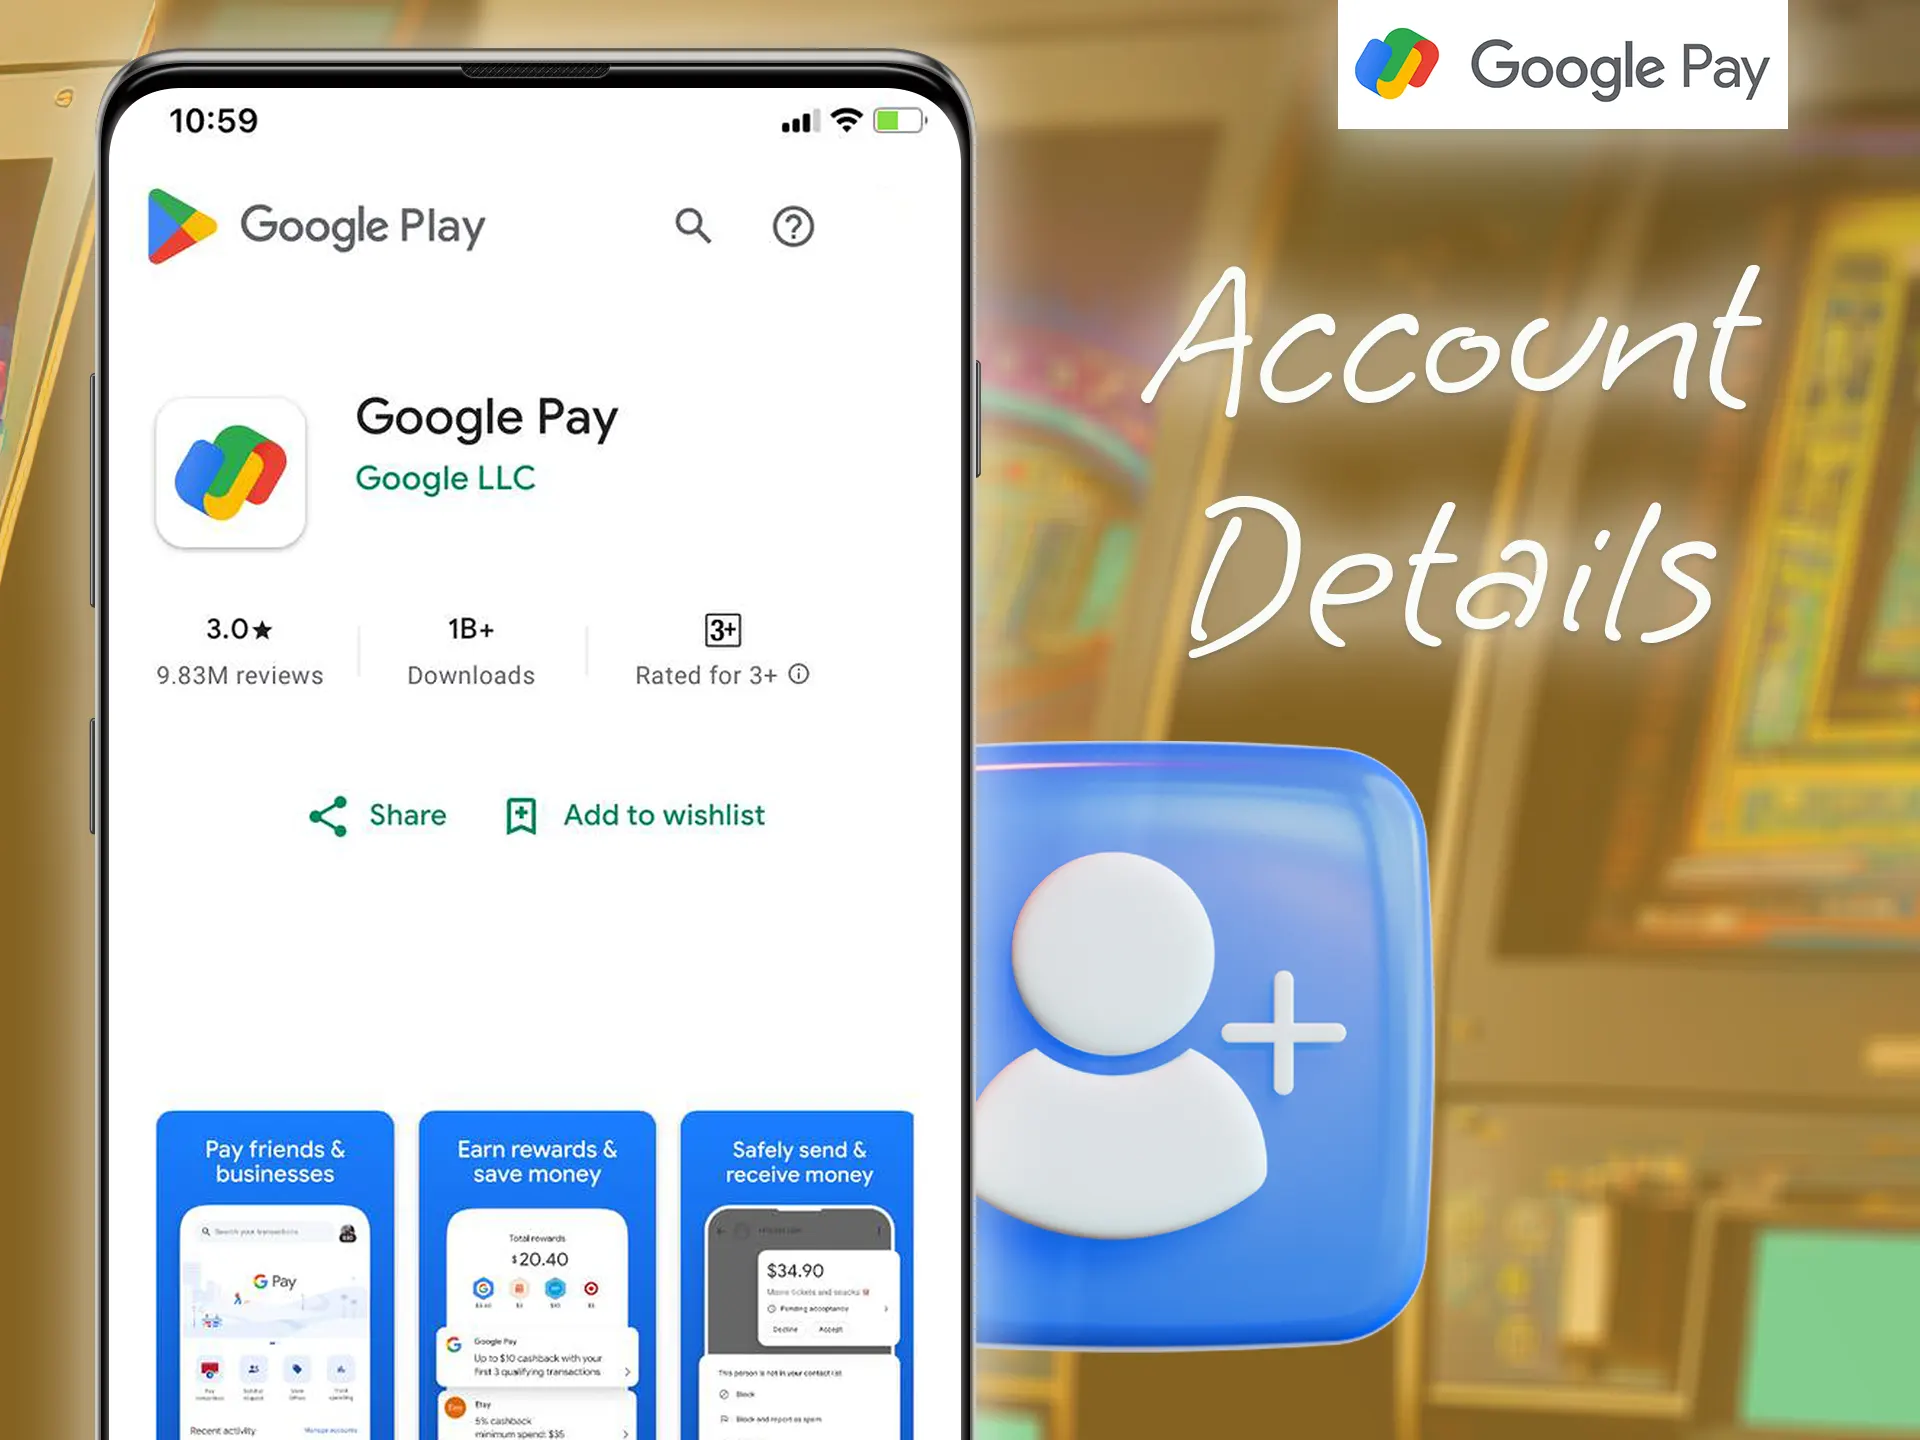 Become a user of the Google Pay.